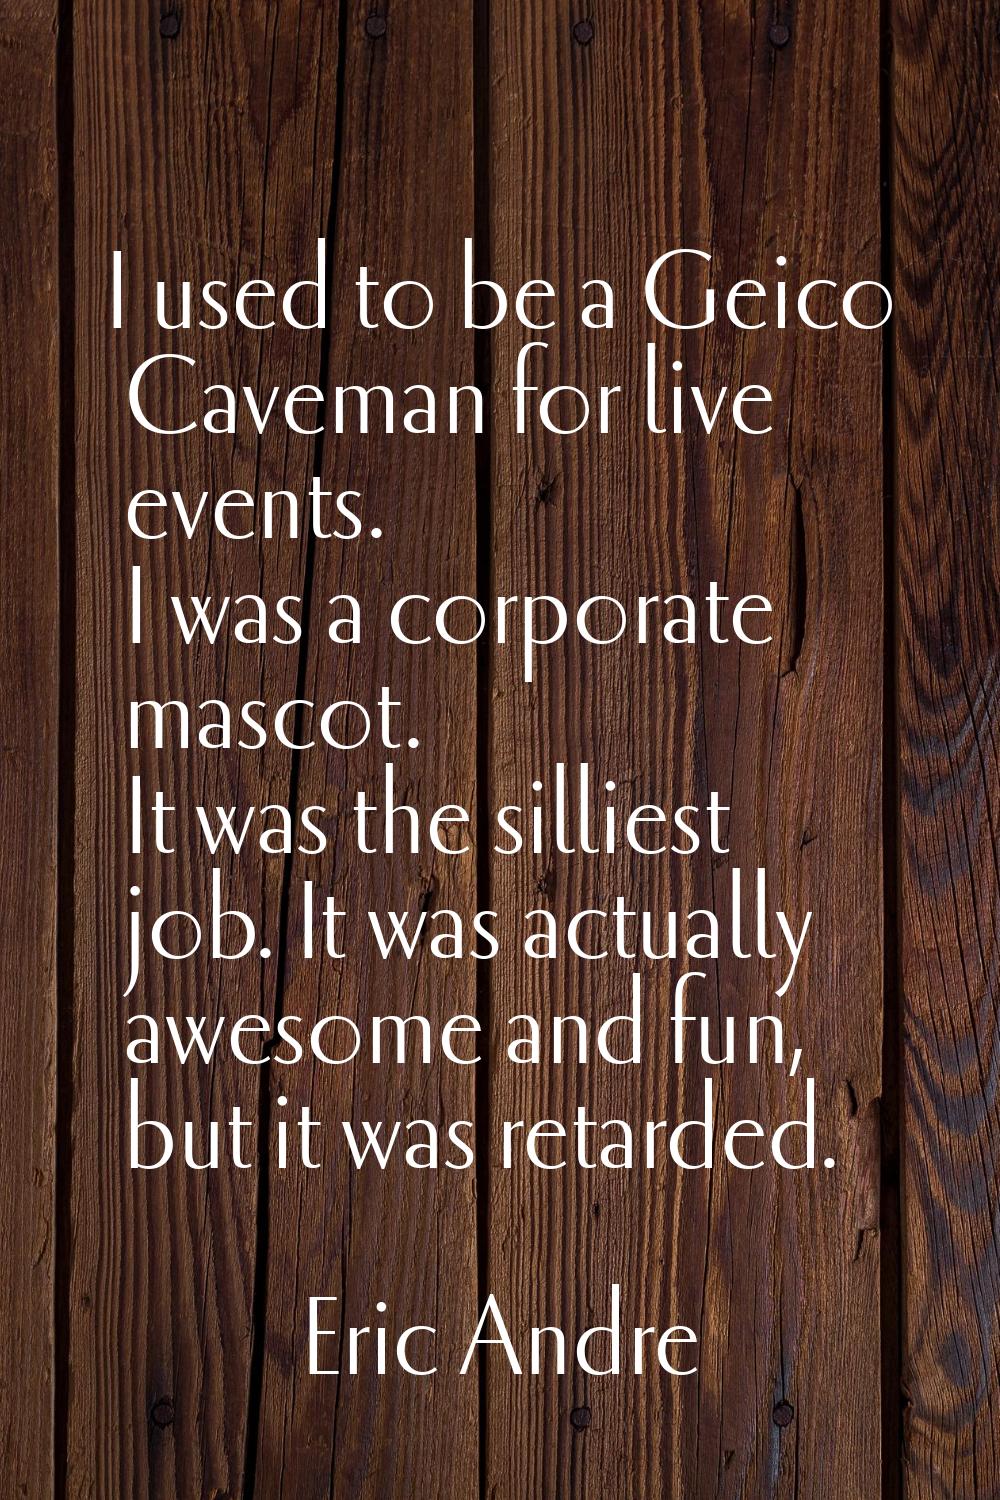 I used to be a Geico Caveman for live events. I was a corporate mascot. It was the silliest job. It